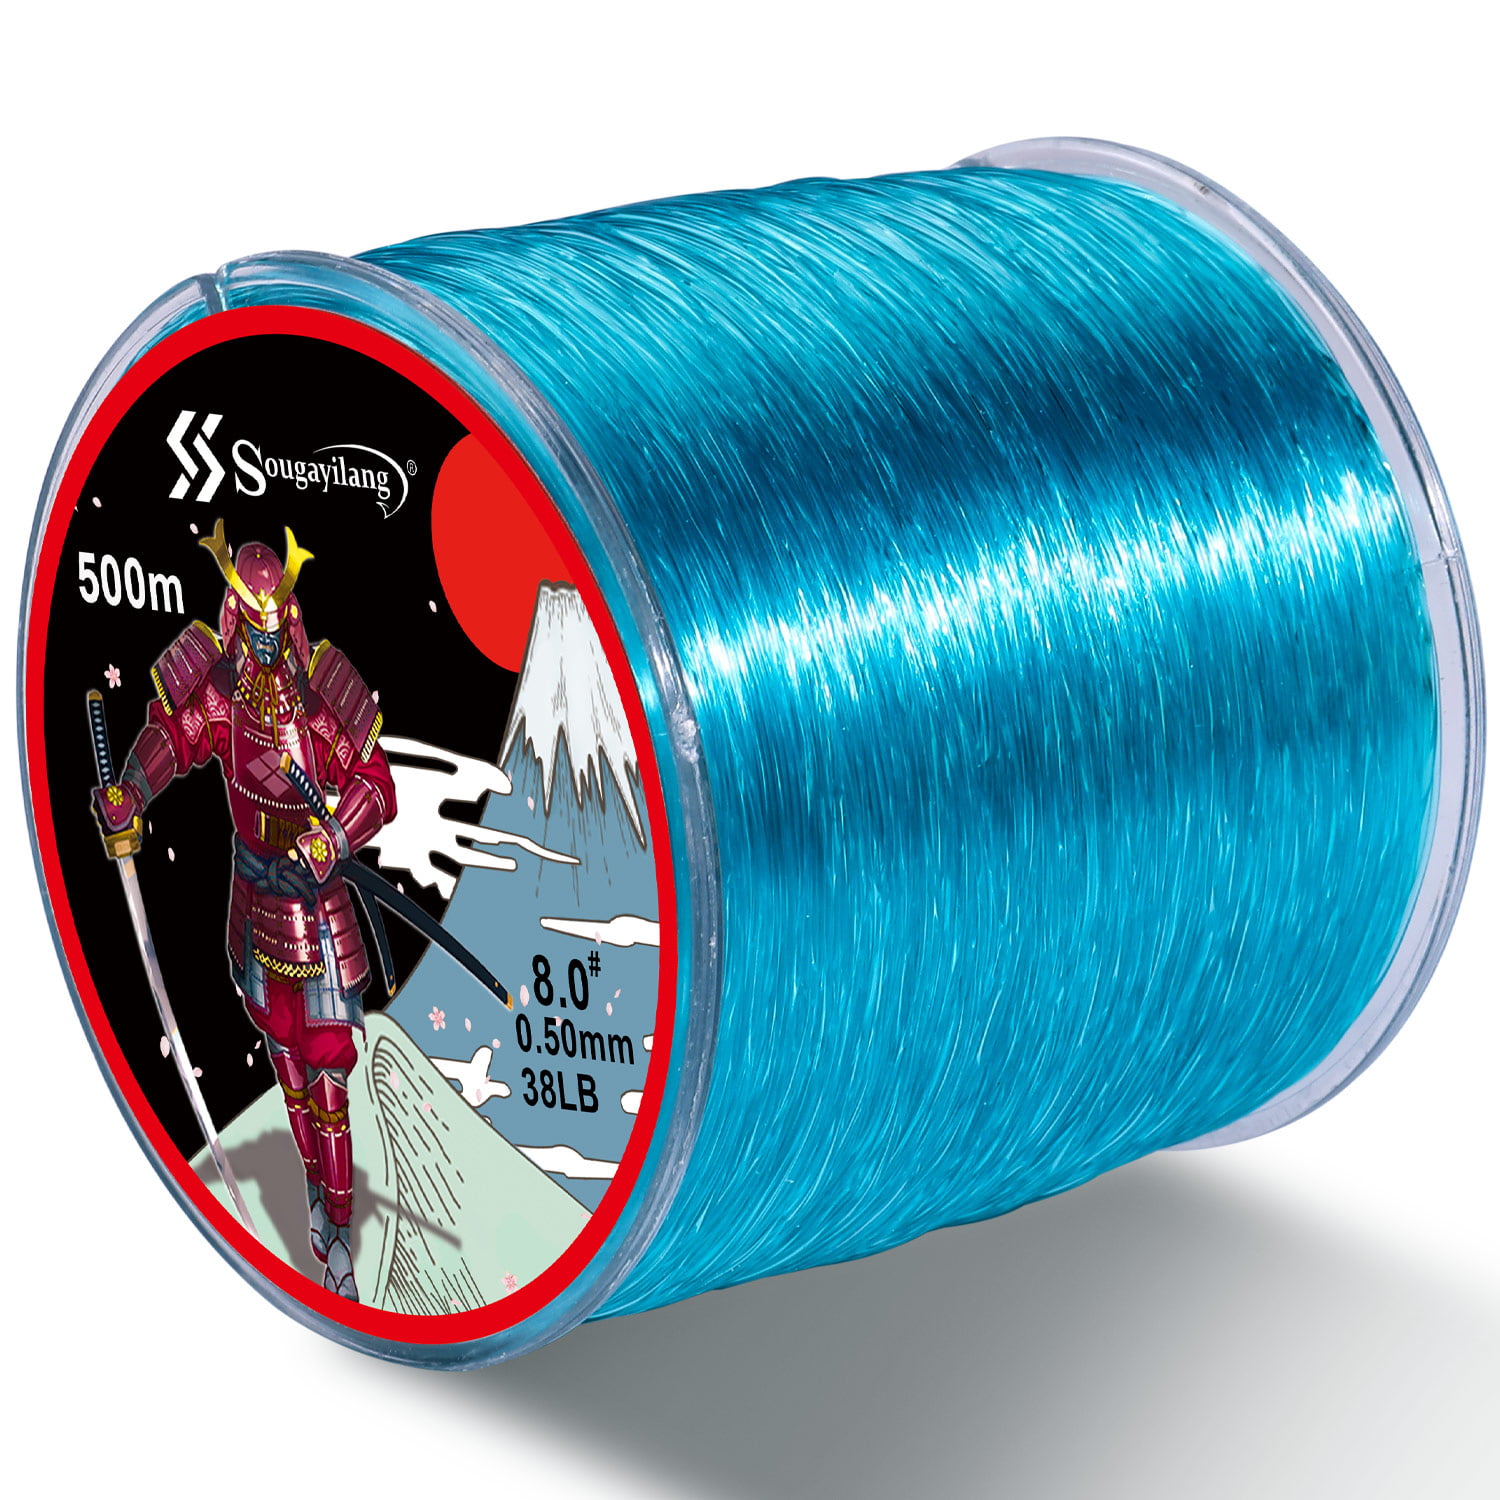 Fishing Line String Cord, 500M Nylon High Strength Super Strong Weave Fishing Line Rope Fish Tackle Tool - for Saltwater, Lake Fishing, Blue